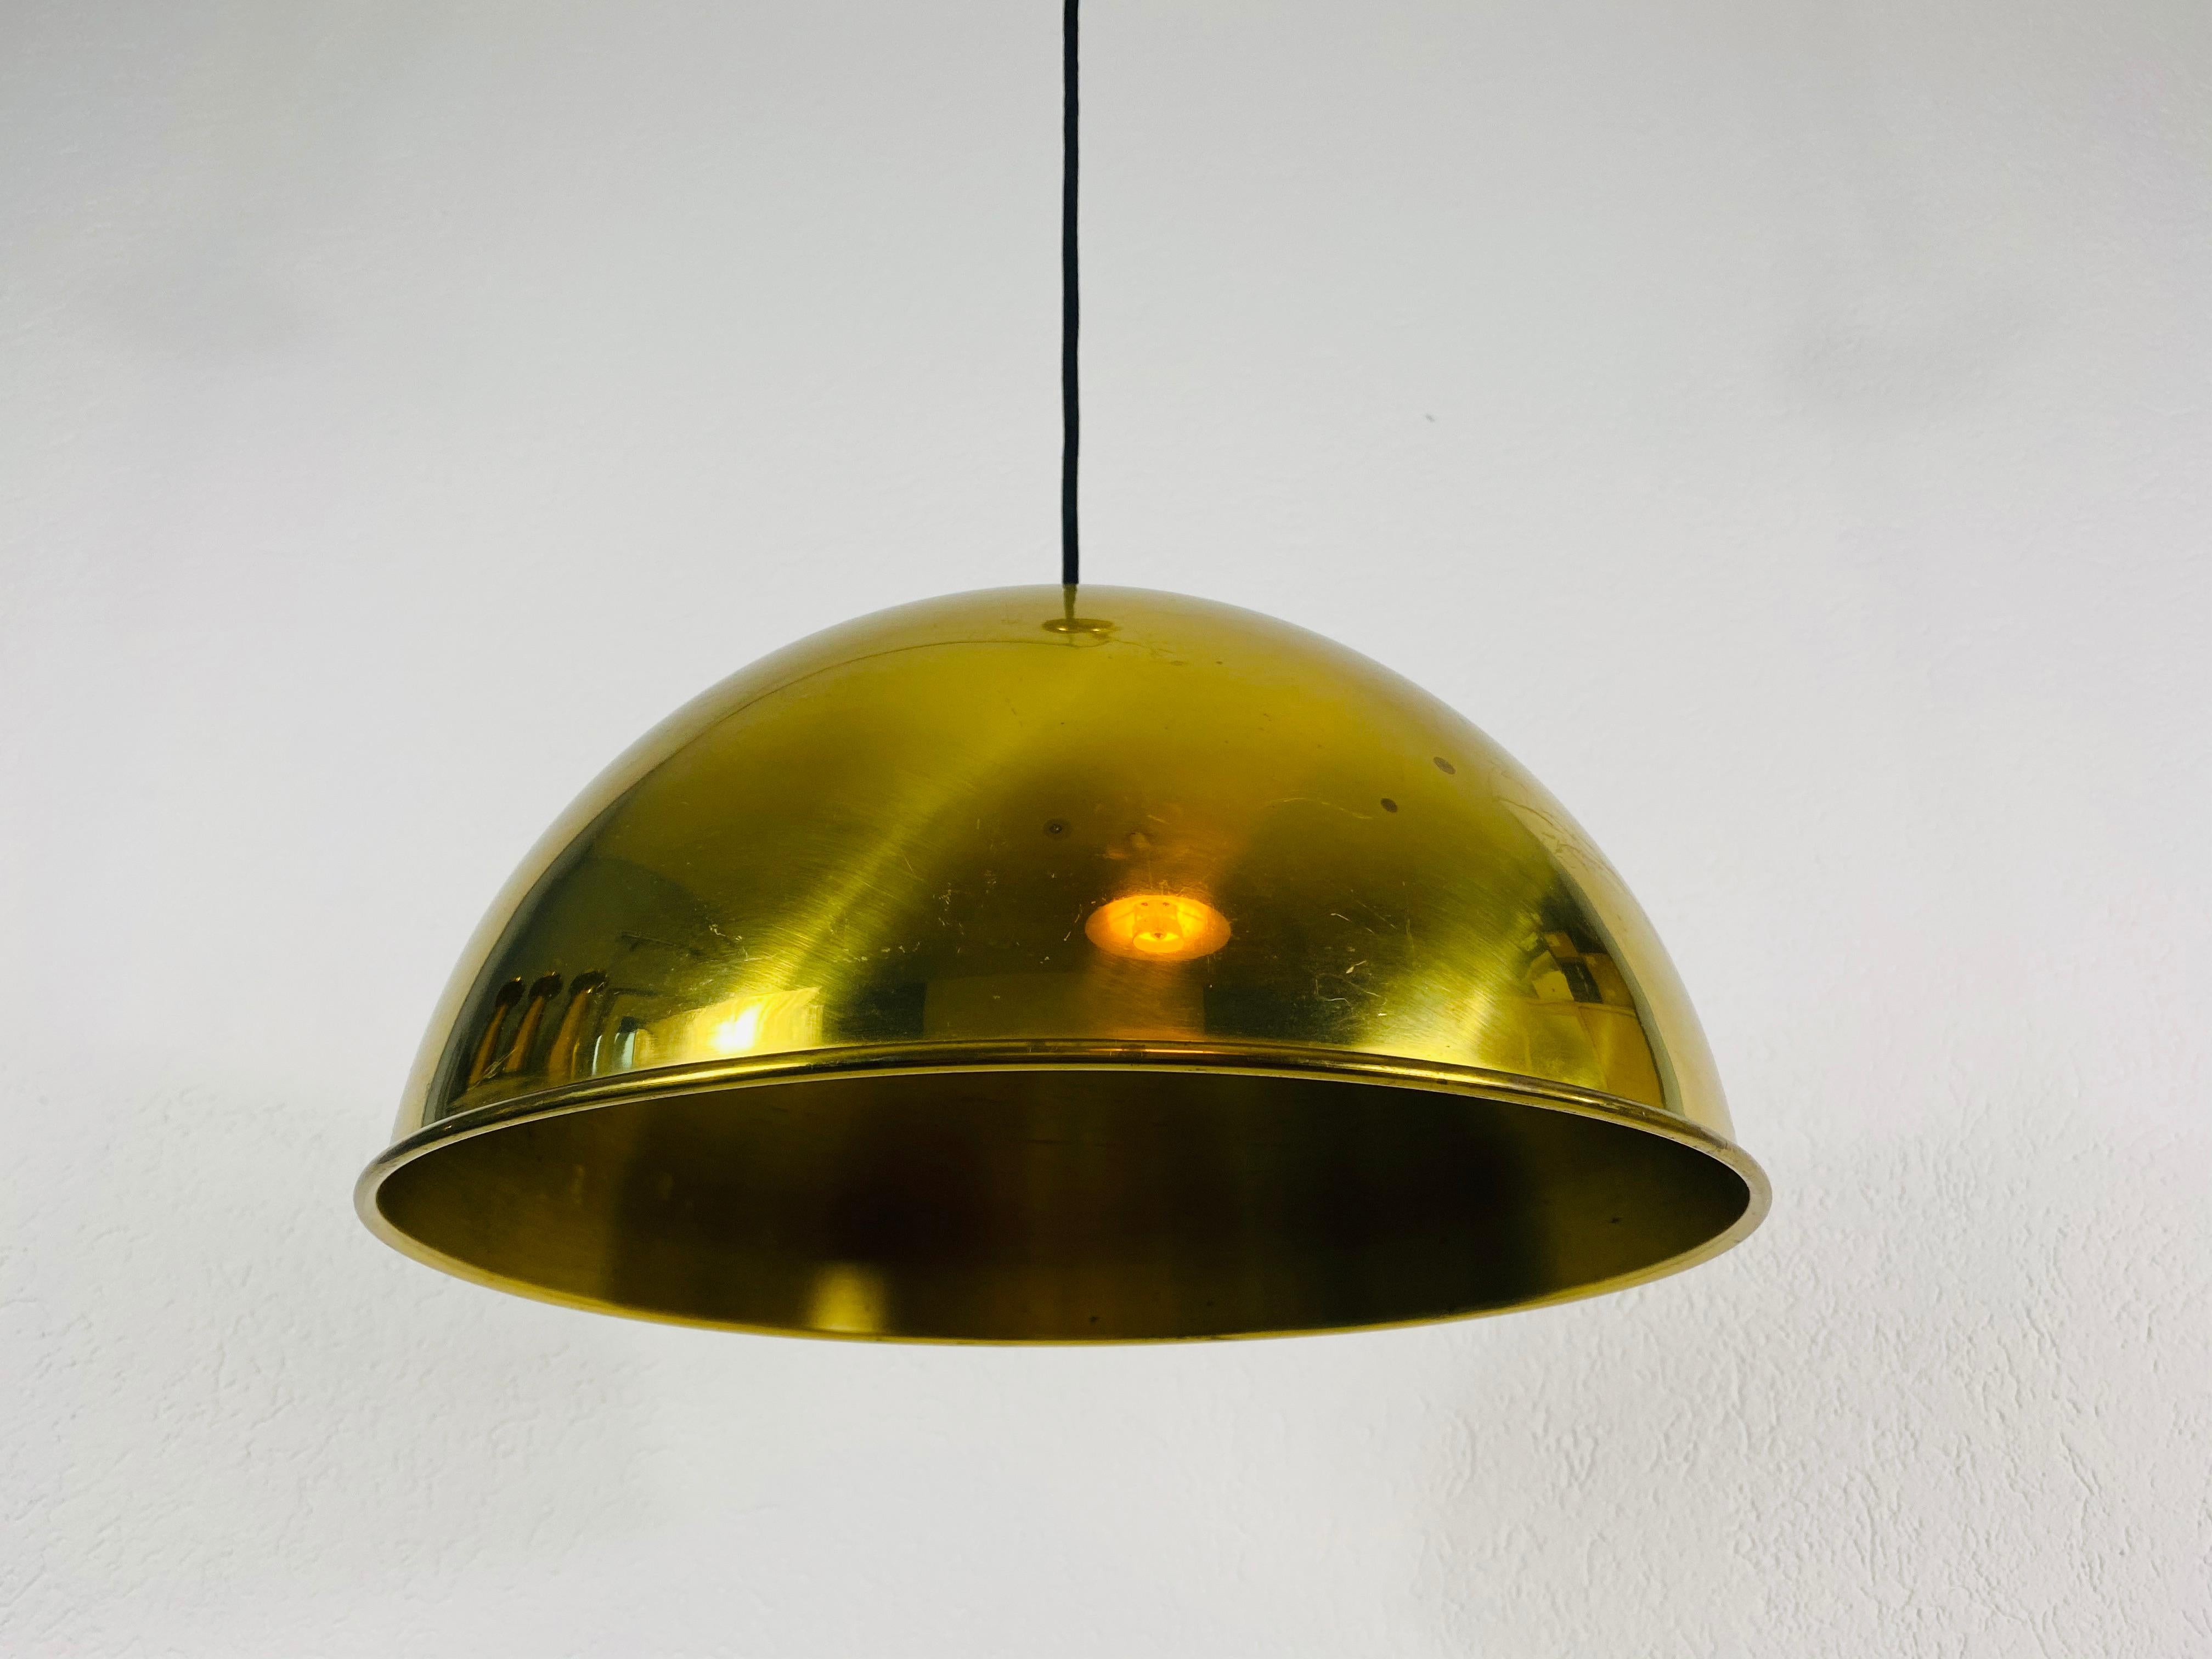 Counter balance pendant designed by Florian Schulz and made in Germany in the 1970s. It is fascinating with its Exclusive Design. The height of the lighting is adjustable.

Measurements of shade:
Height 25 cm
Width 37 cm

The light requires